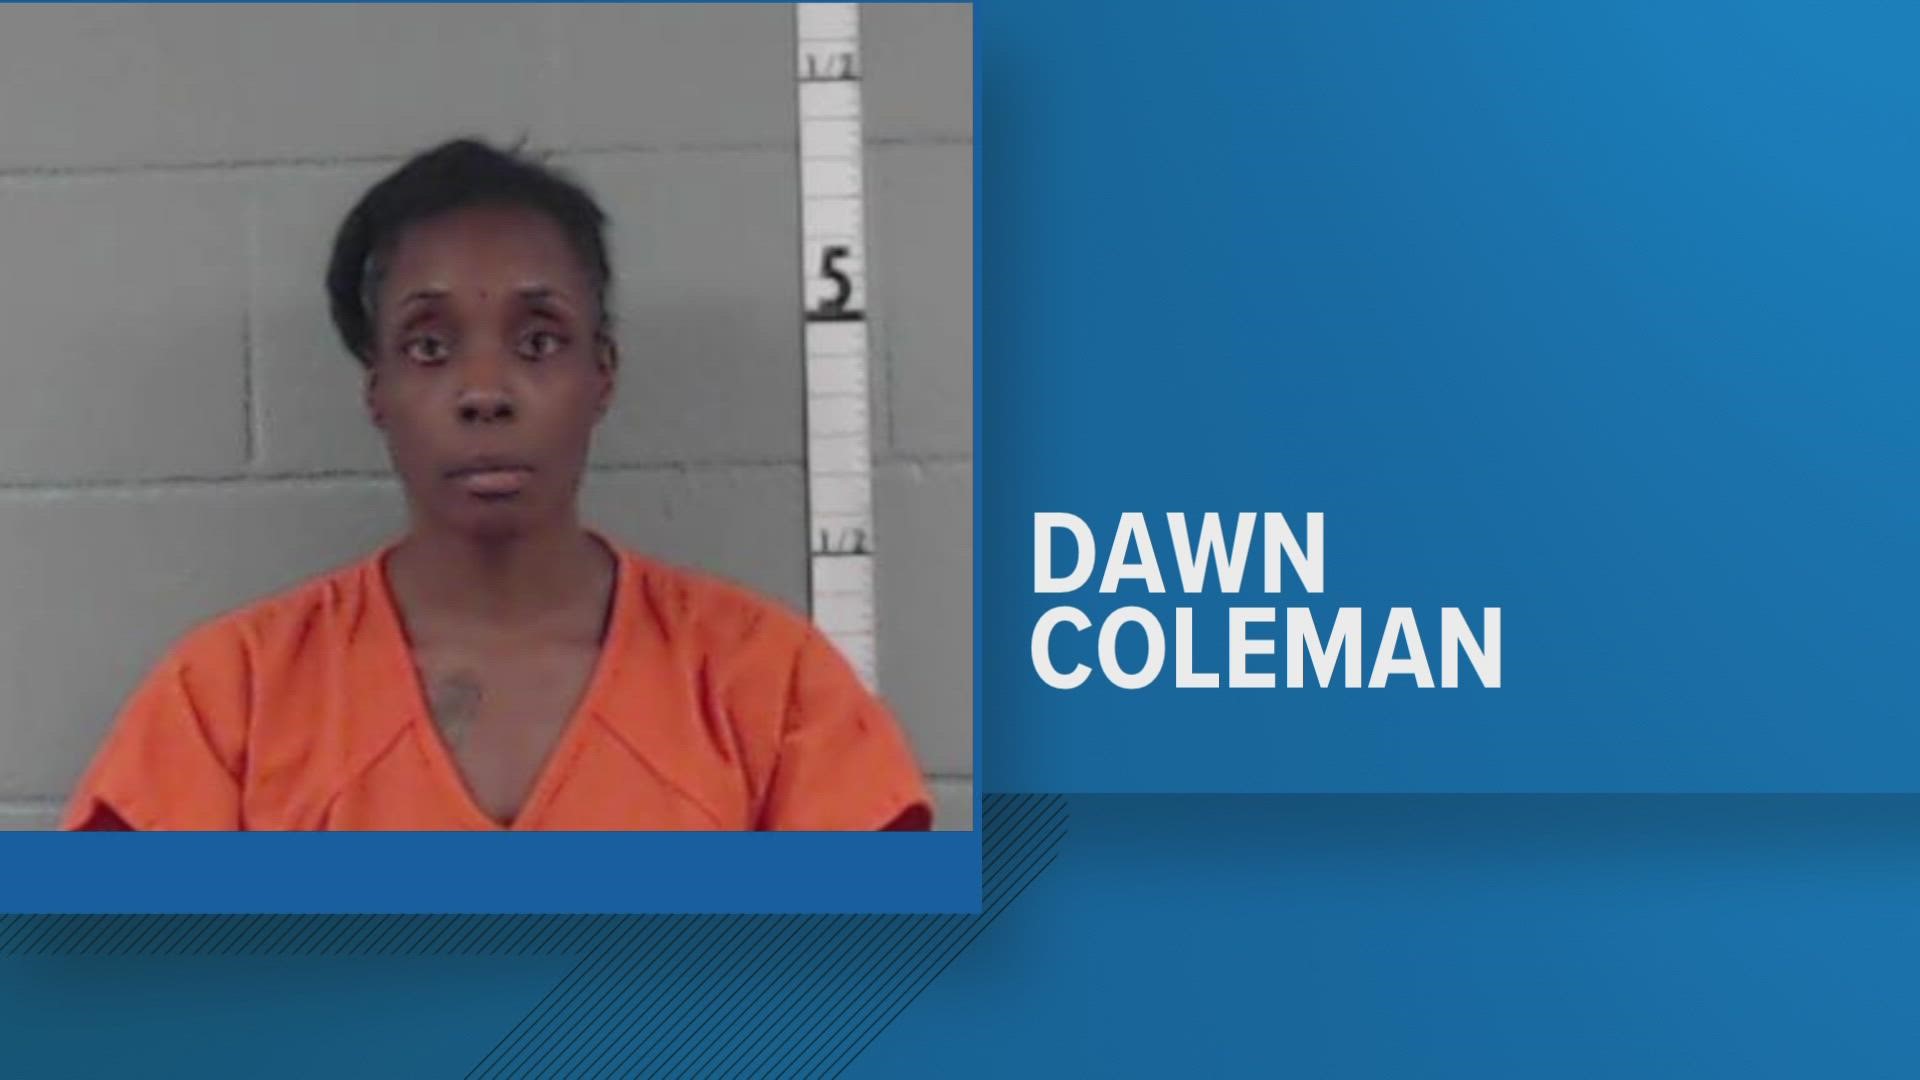 The Washington County Sheriff's Office says Dawn Coleman was booked early Sunday morning in relation to the death of young Cairo Jordan.